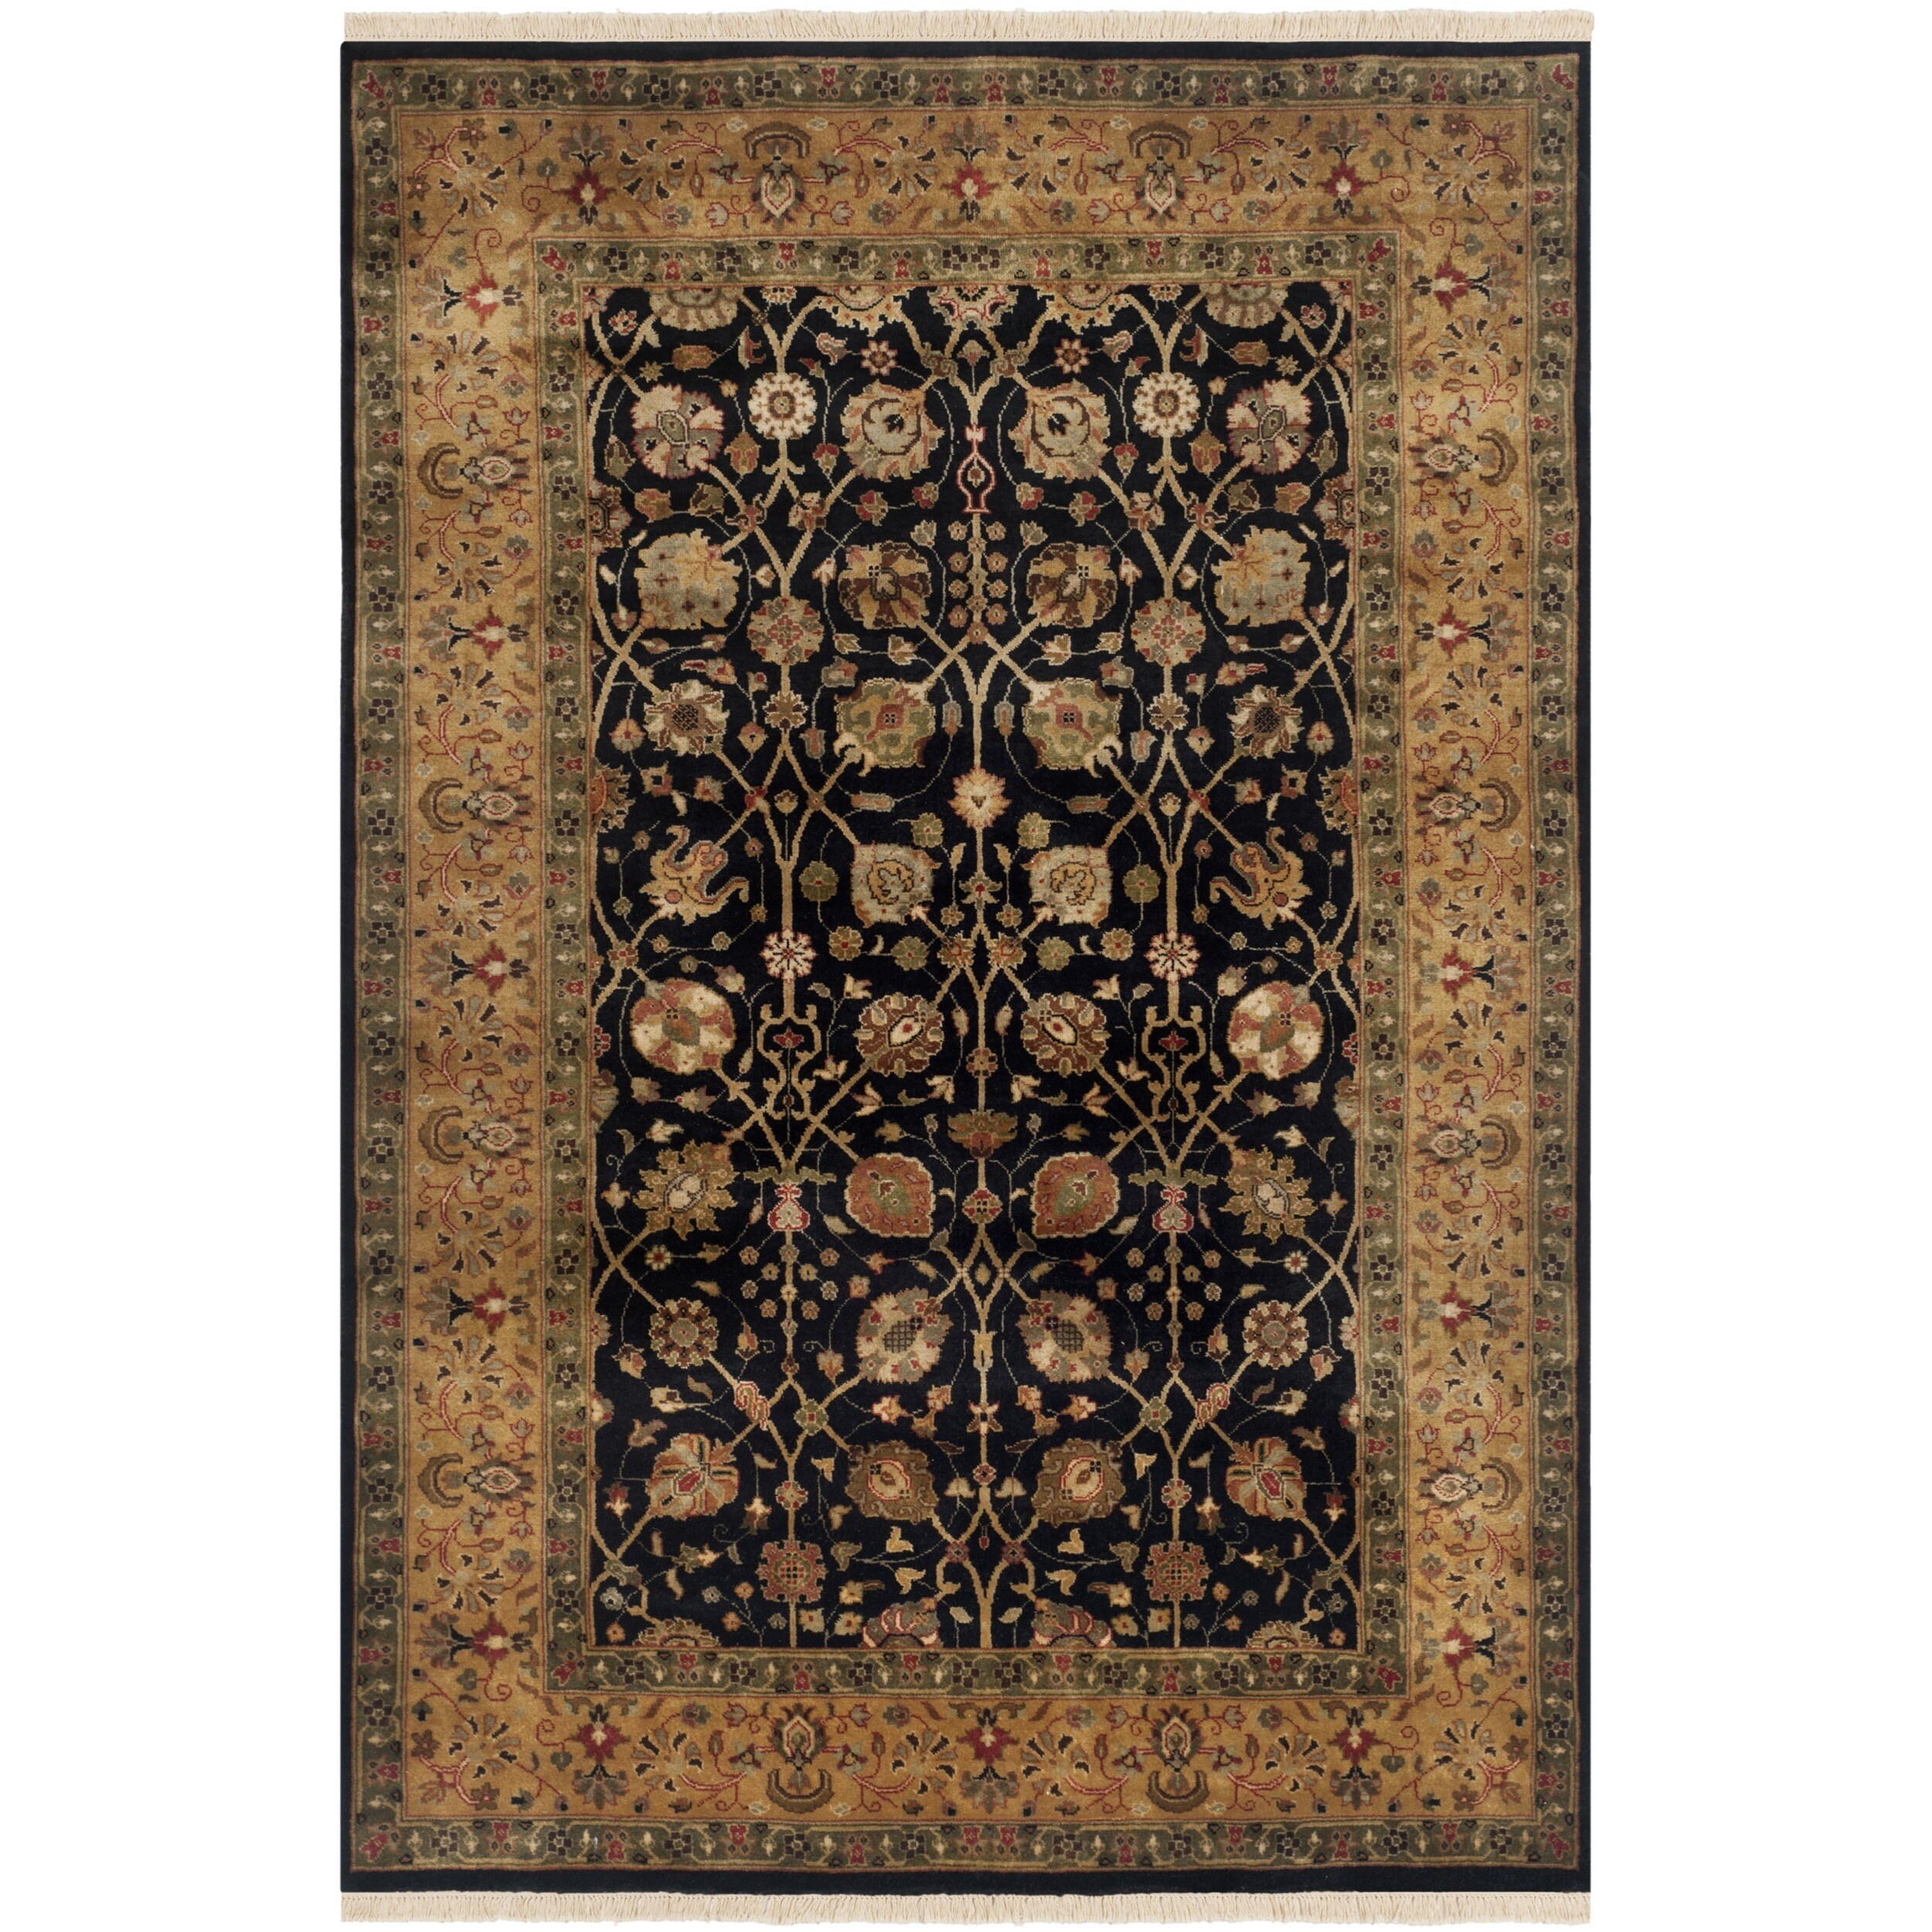 Safavieh Hand knotted Ganges River Black/ Gold Wool Rug (4 X 6)